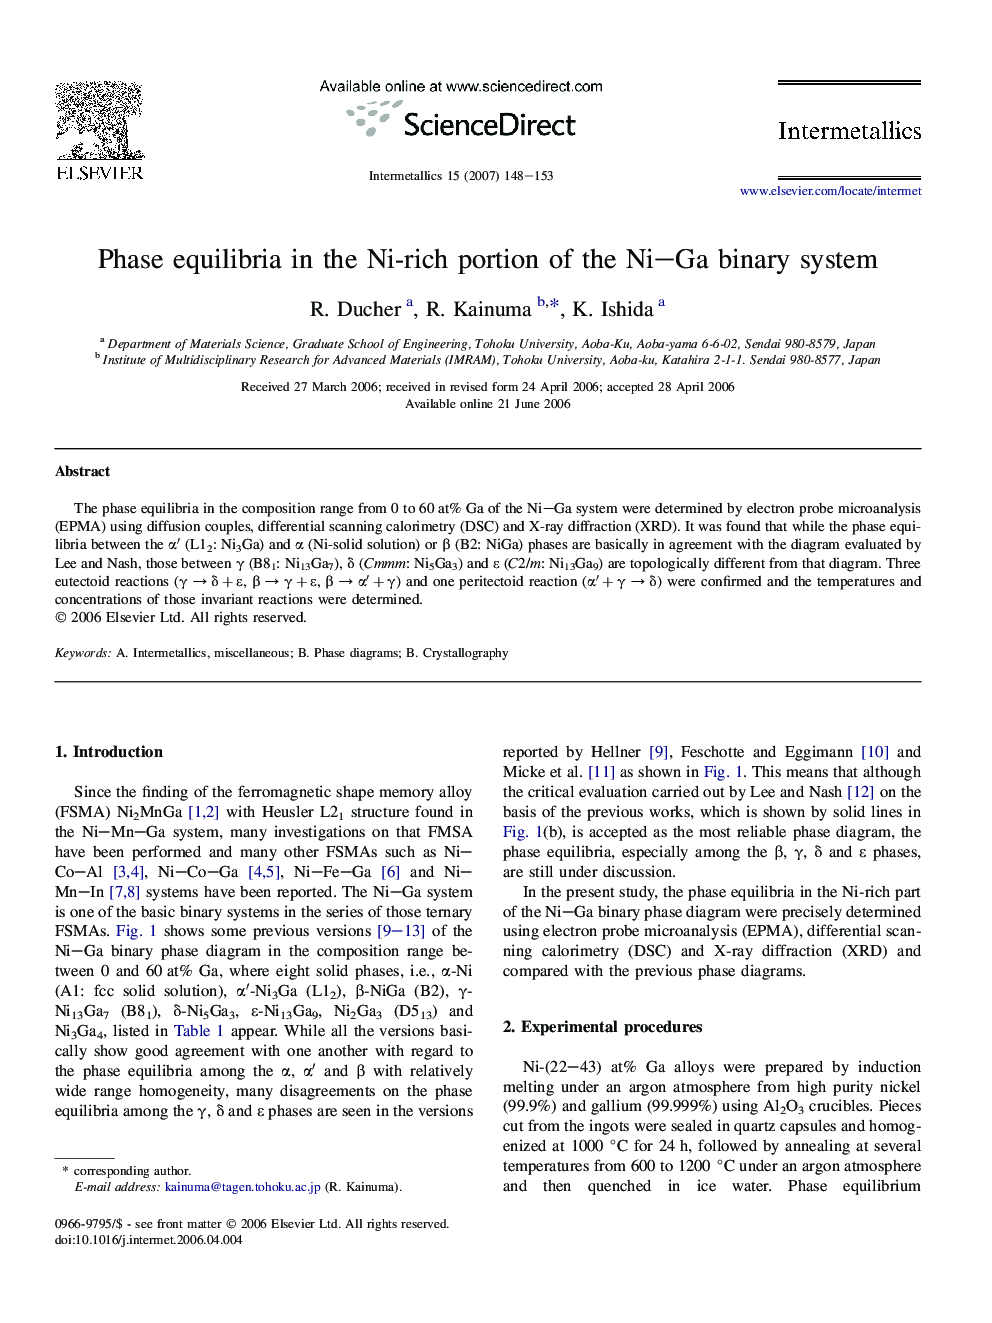 Phase equilibria in the Ni-rich portion of the Ni–Ga binary system